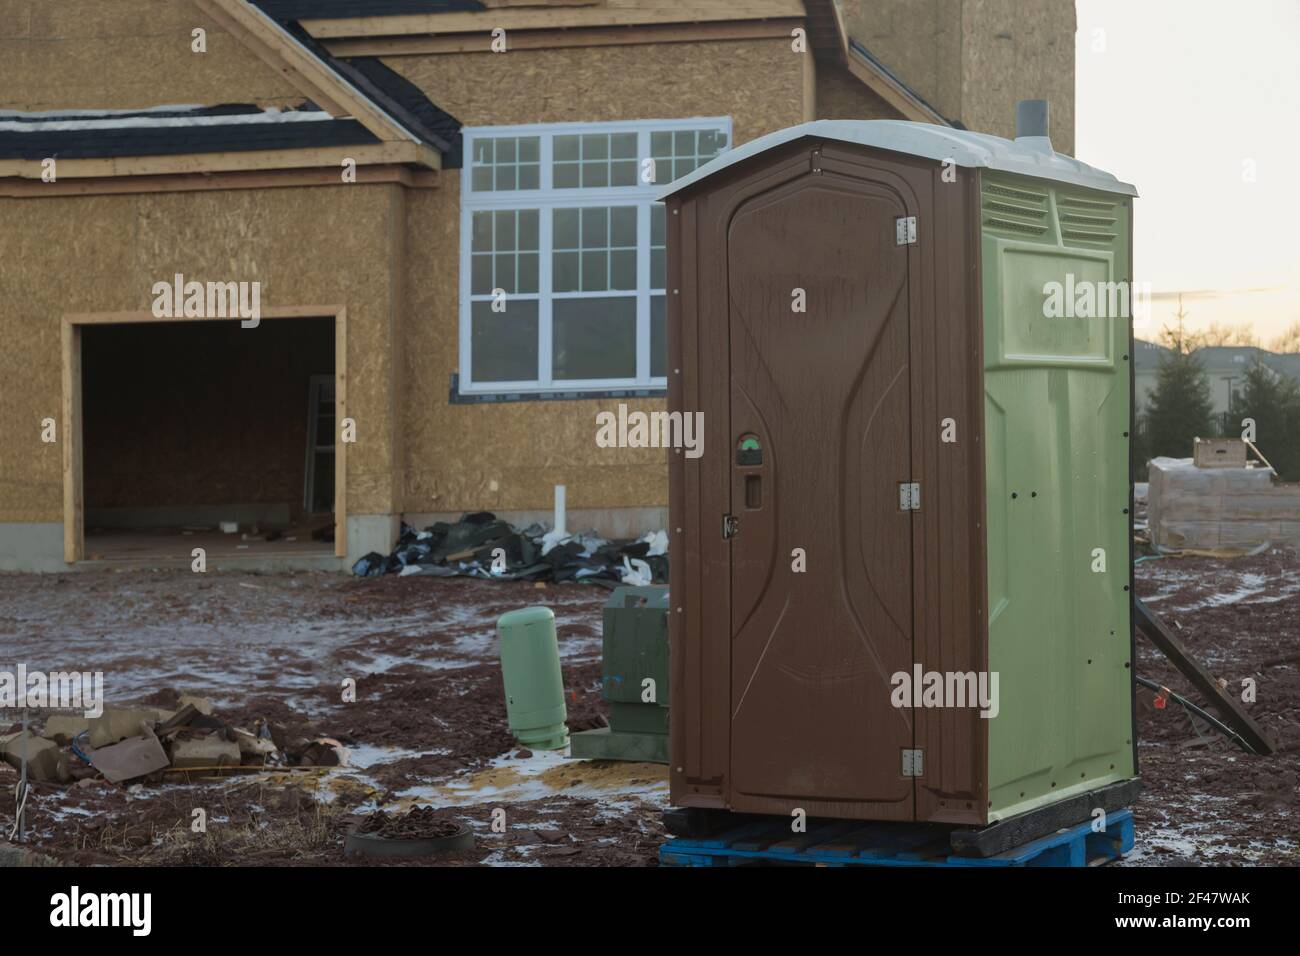 WC used in construction industry portable toilet cabin system. Stock Photo